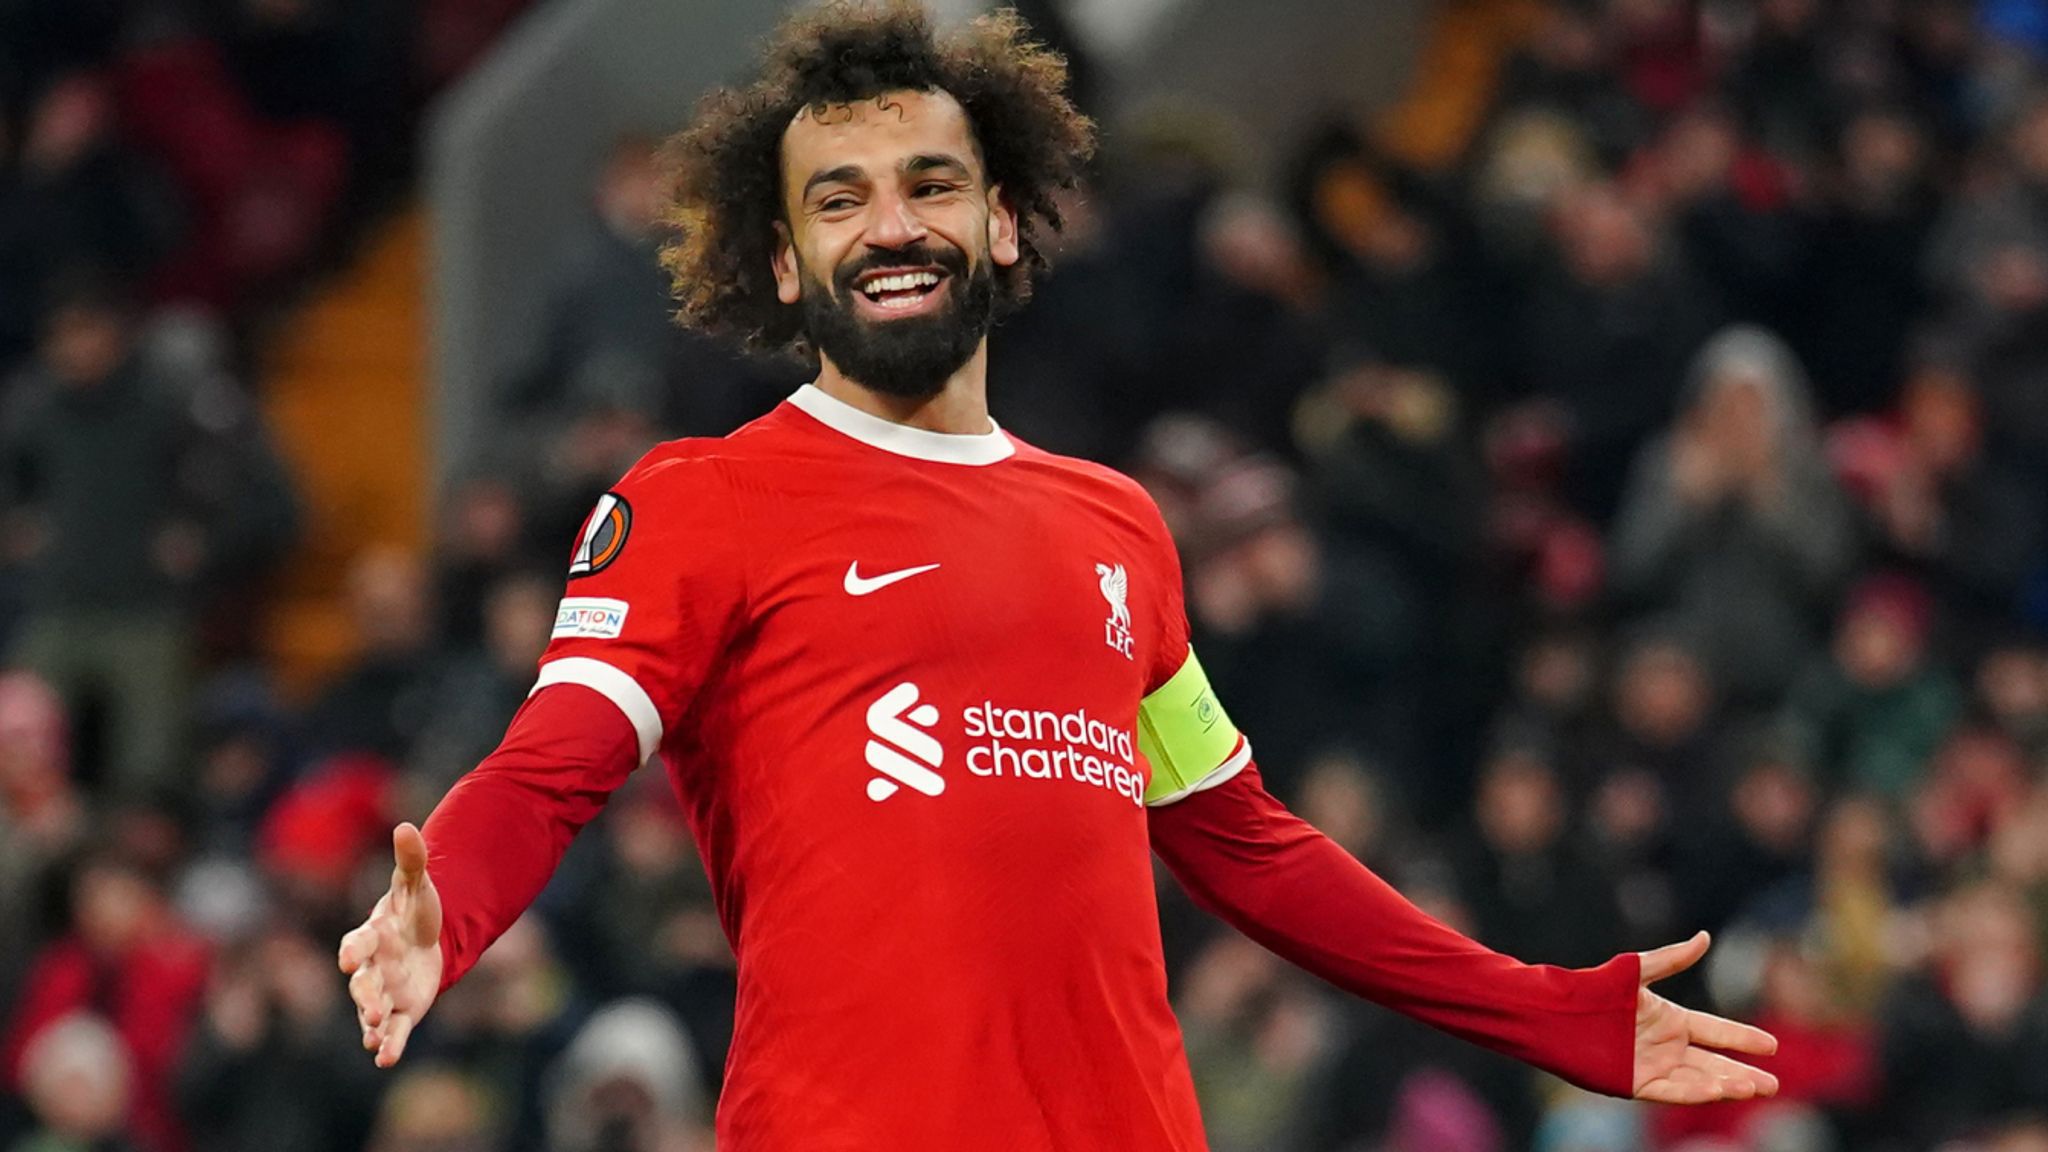 Mohamed Salah fit and available to play for Liverpool at Brentford, Jurgen Klopp confirms